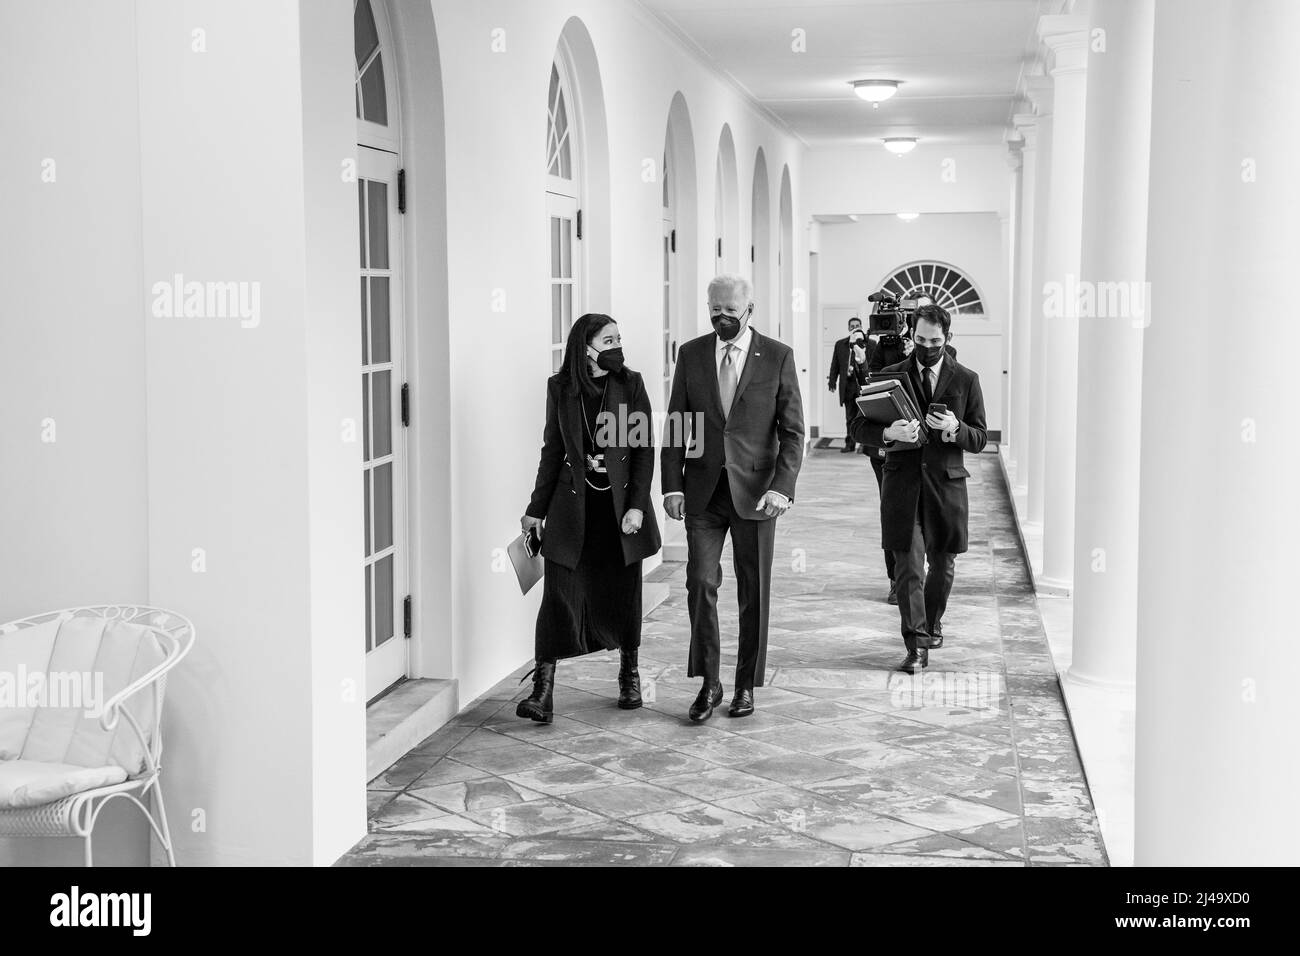 President Joe Biden walks through the Colonnade of the White House, Friday, February 25, 2022, on his way to the Oval Office. (Official White House Photo by Adam Schultz) Stock Photo